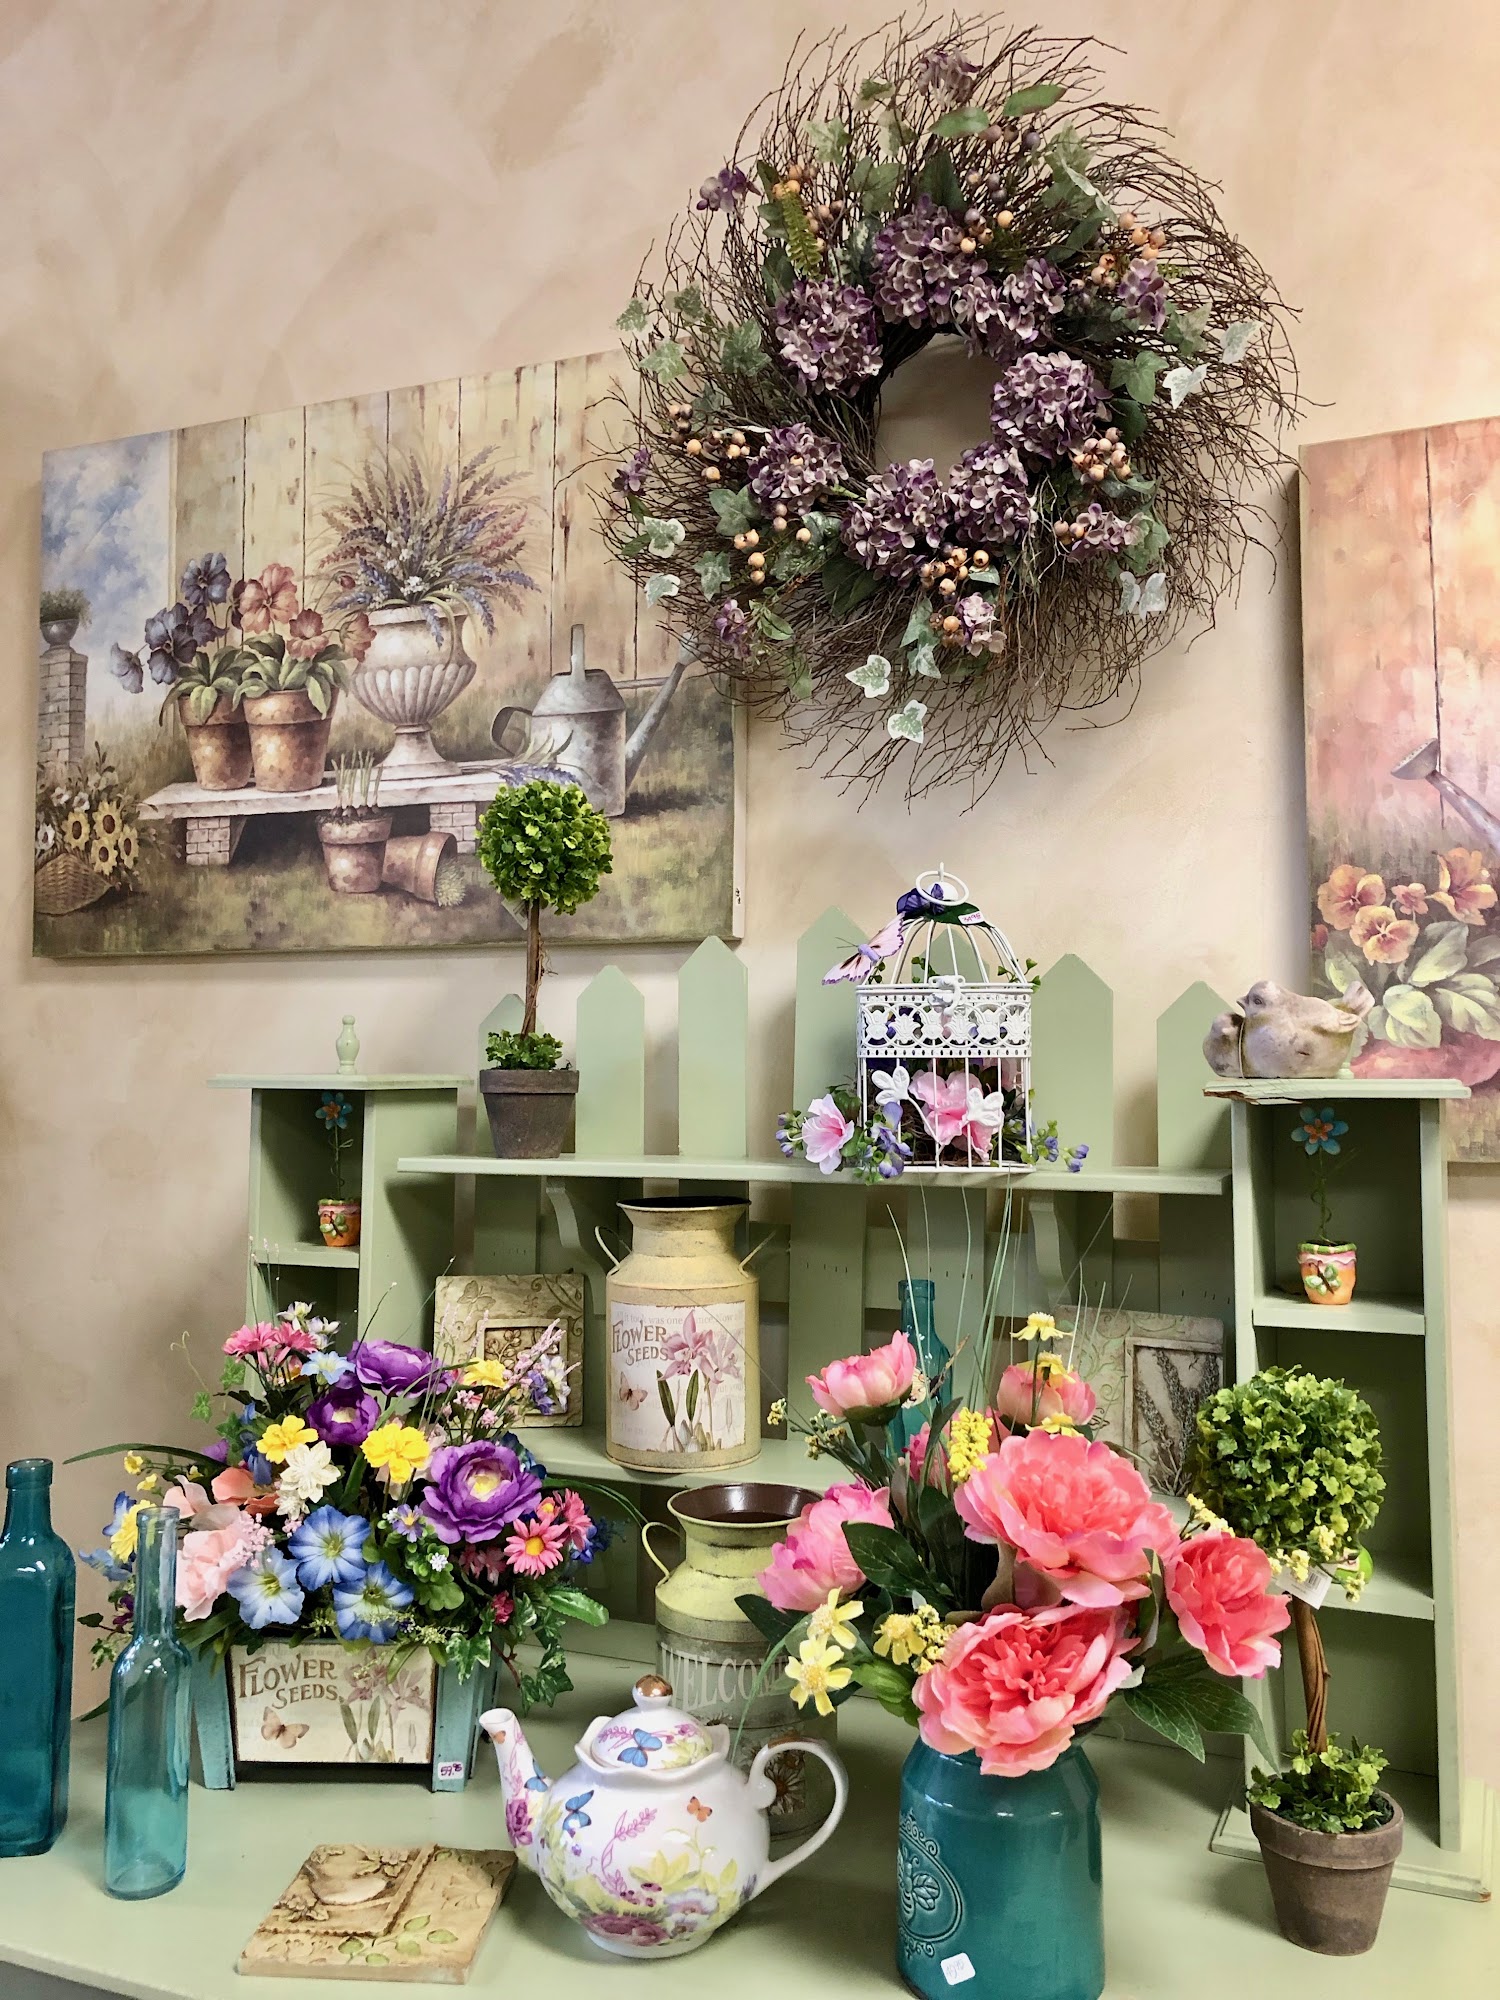 Hatfield Floral & Gifts